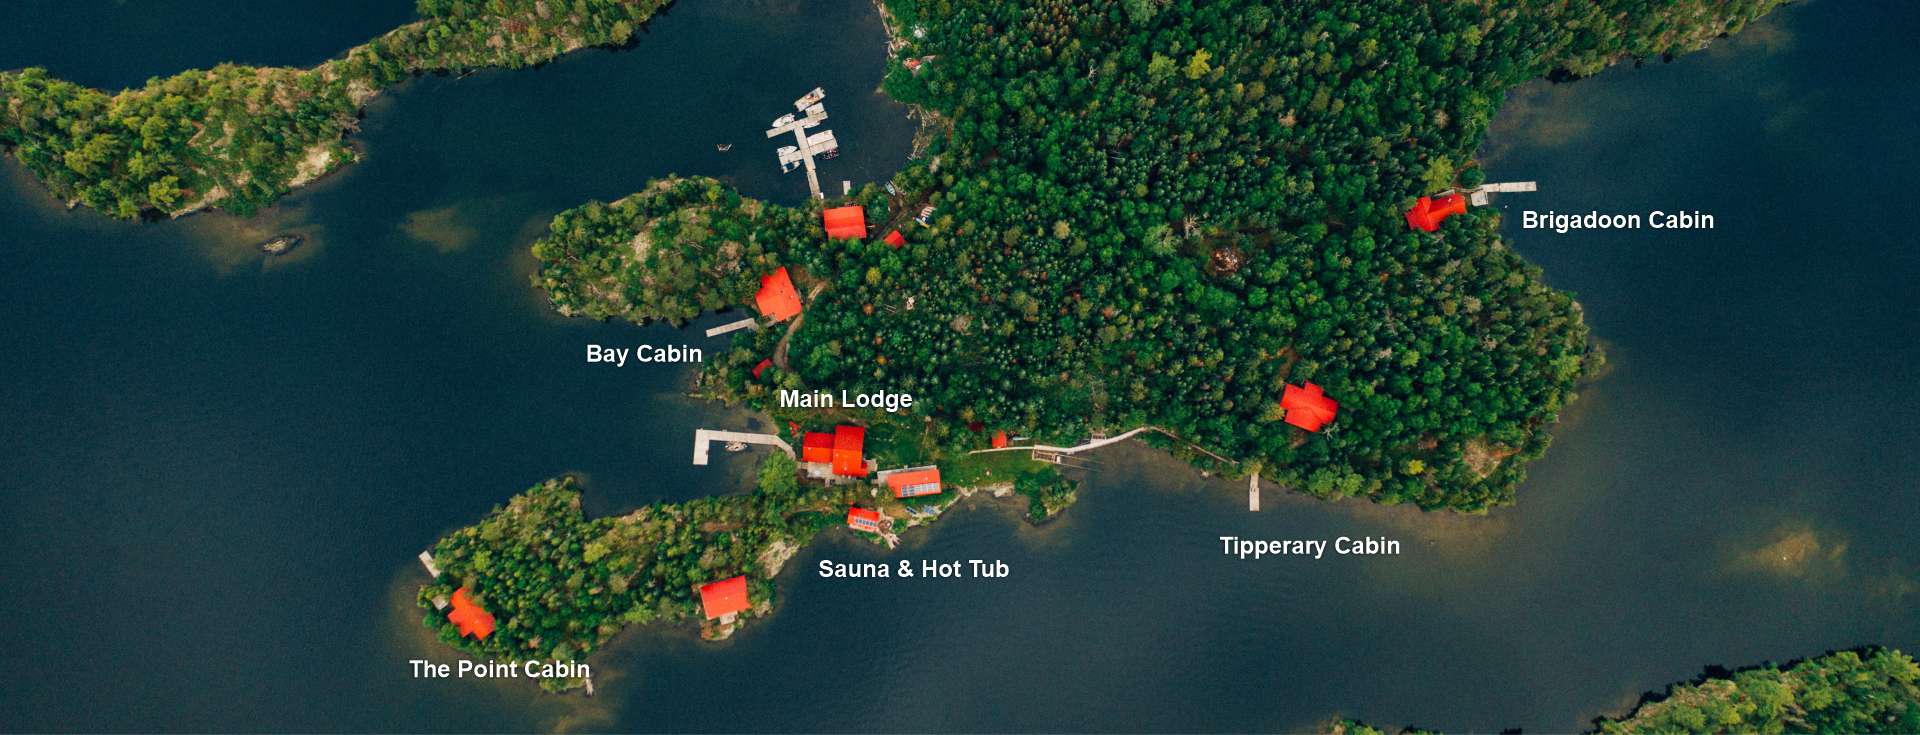 Manitou Weather Station Aerial Overview of Cabins